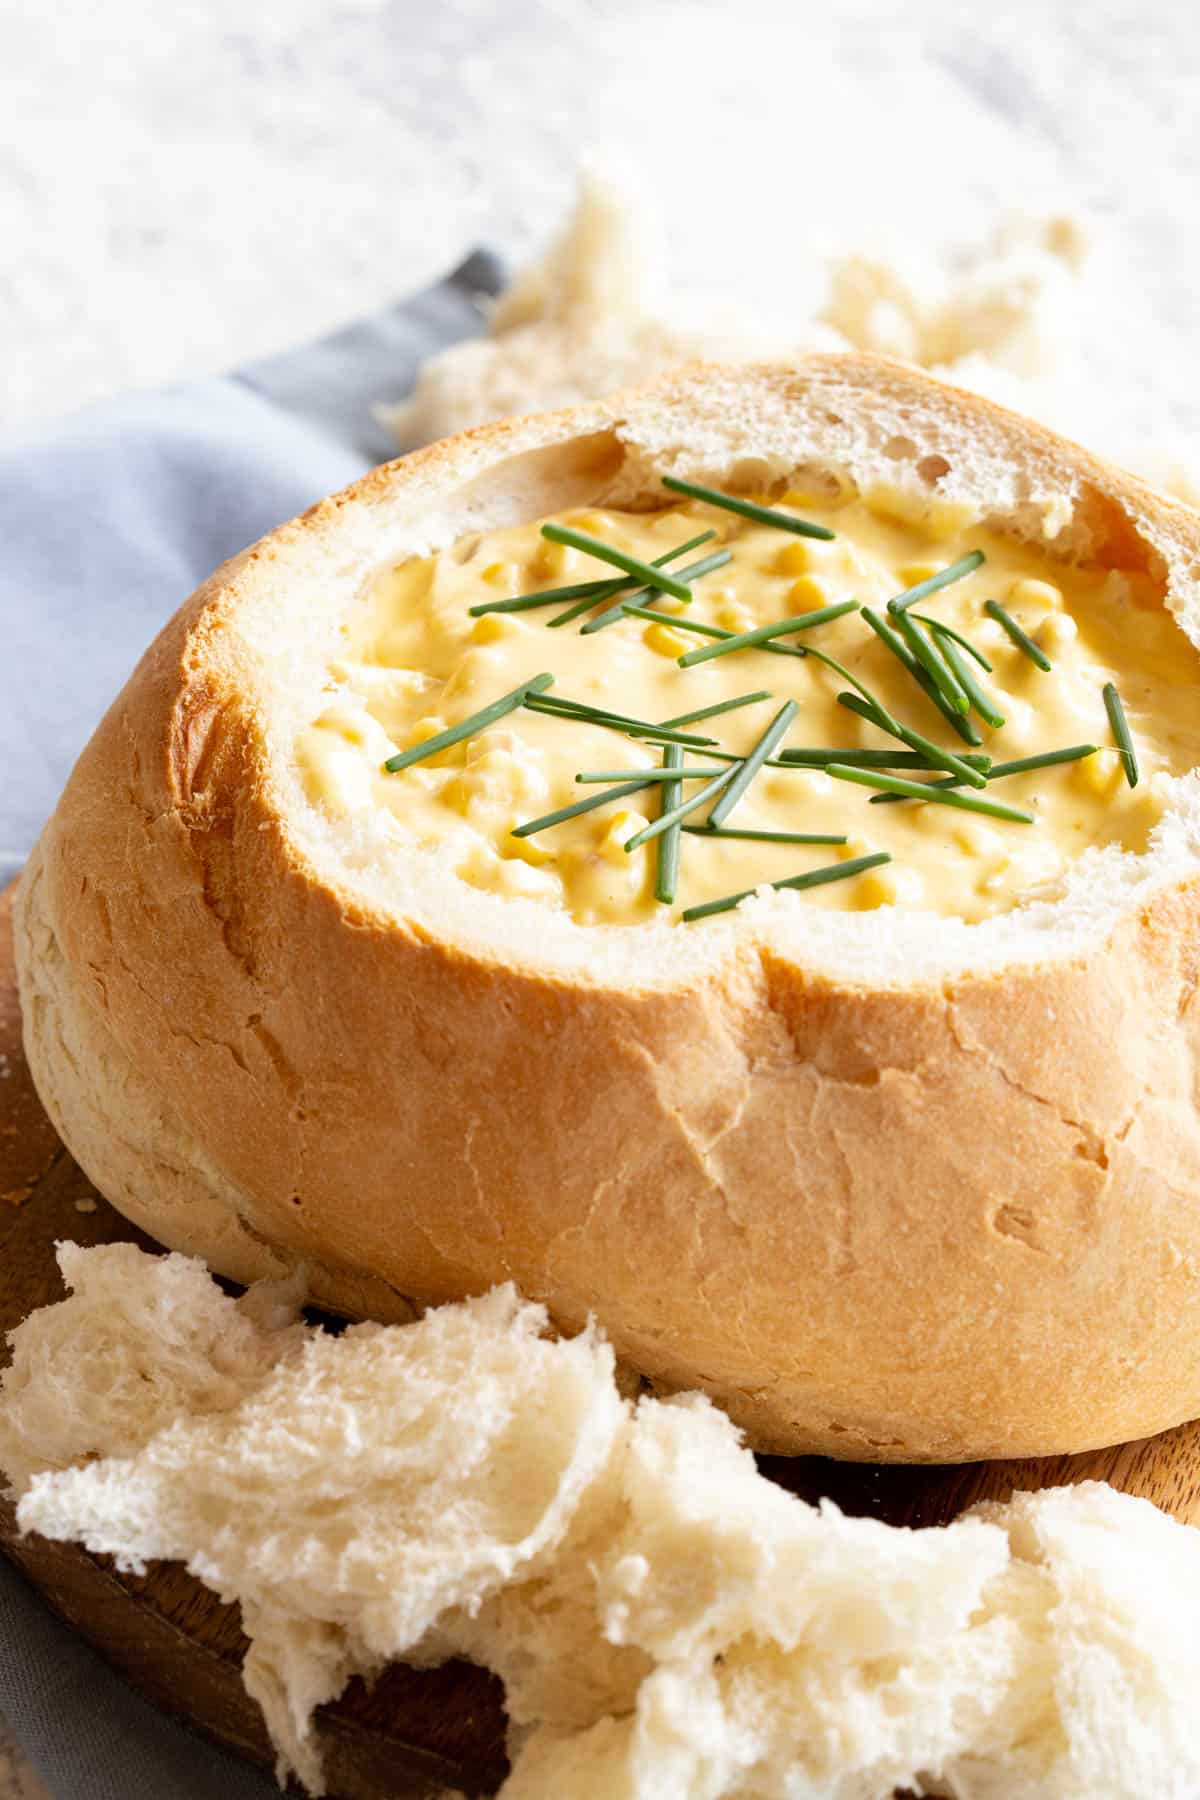 A golden, creamy chicken and corn cob loaf dip with a garnish of fresh chives.